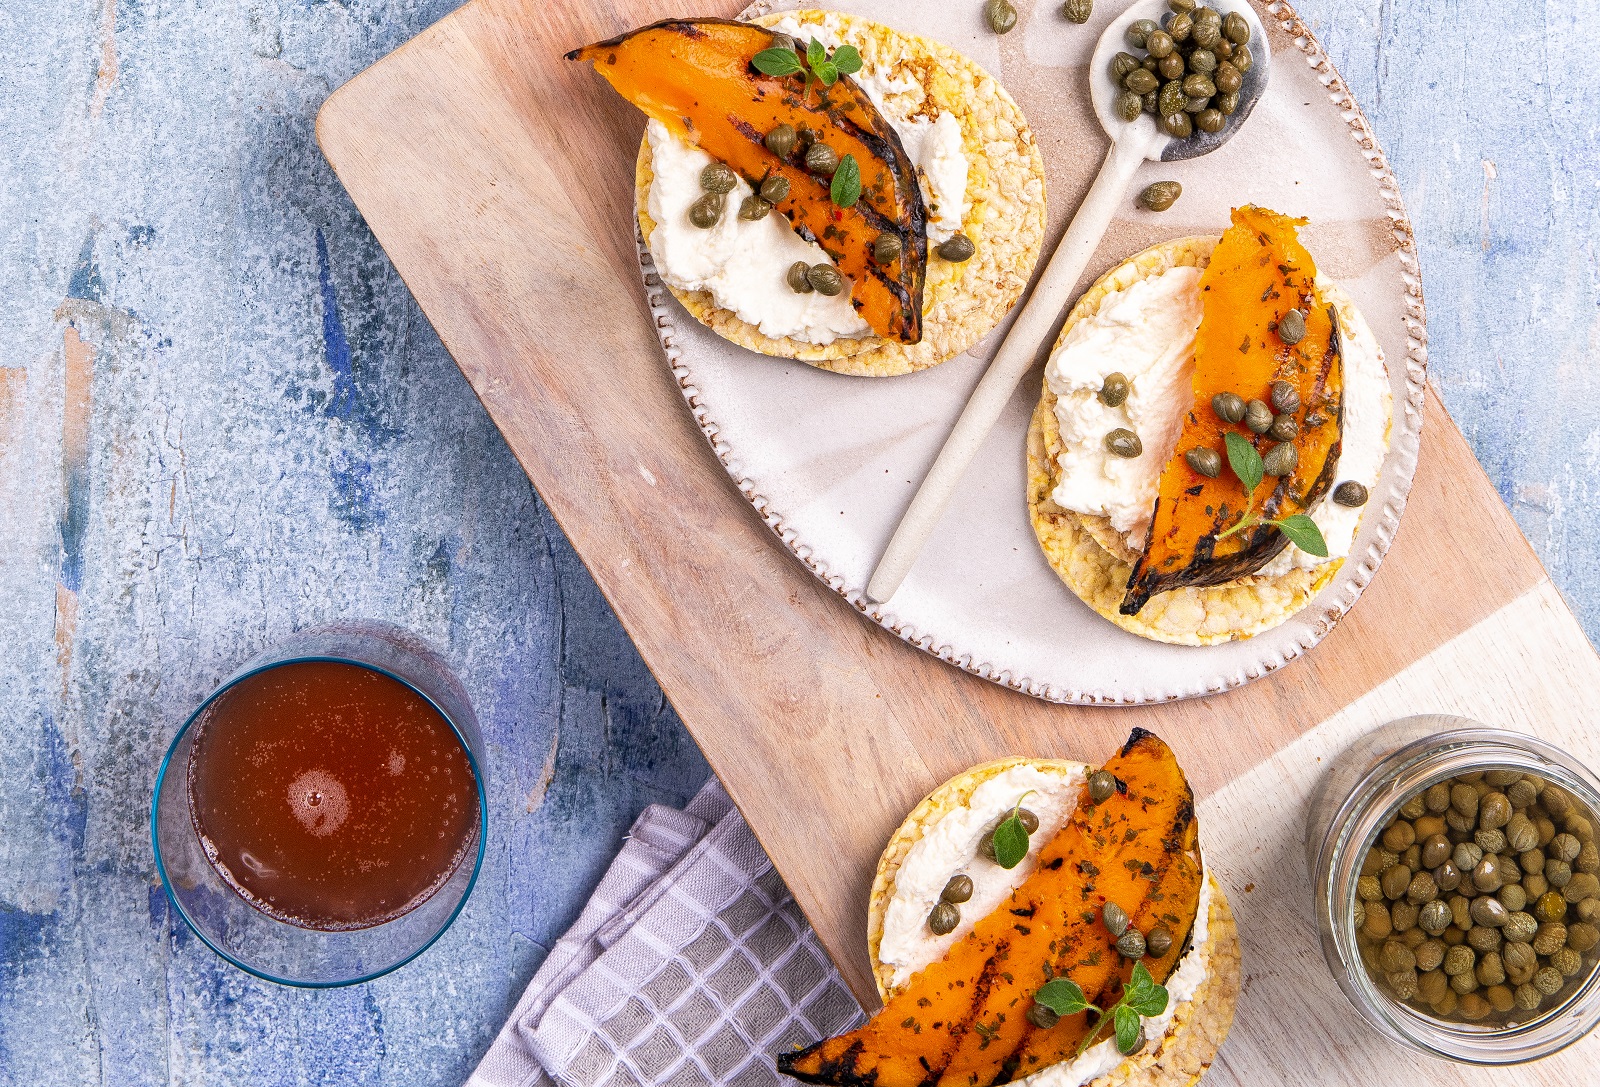 Leftover Roast Pumpkin, Ricotta & Capers on Corn Thins slices